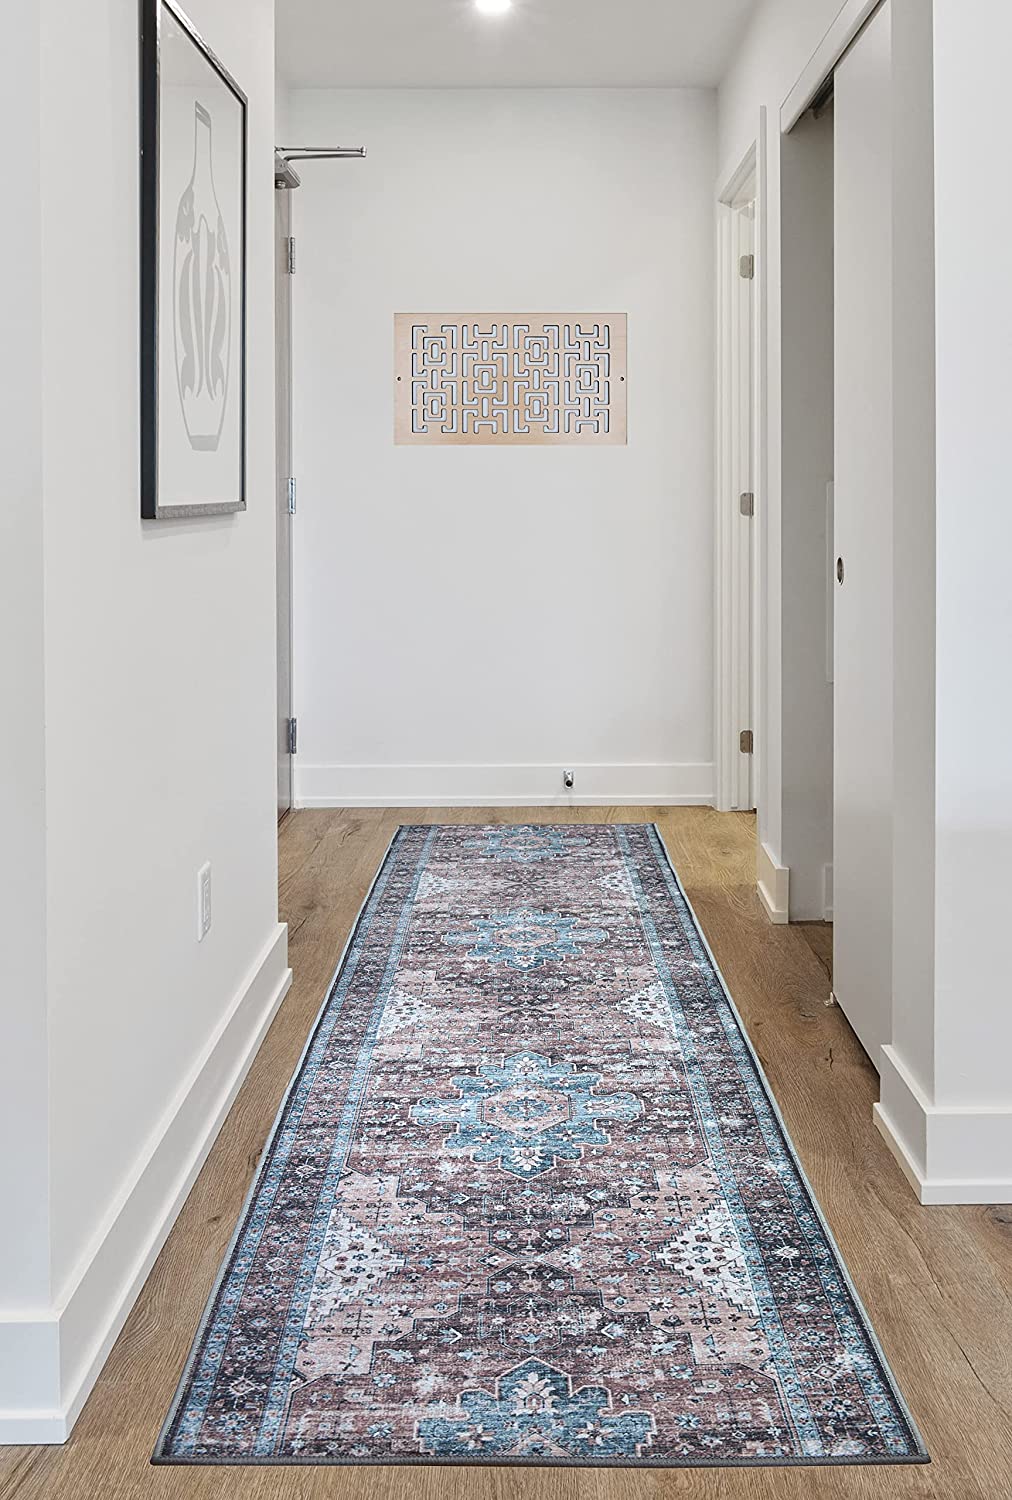 Image Home Collection Custom Size Runner Rug Oriental Kerman Medallion Design Taupe-MultiColor Skid Resistant Cut To Size Rug Runners Customize By Feet and 25 in Width